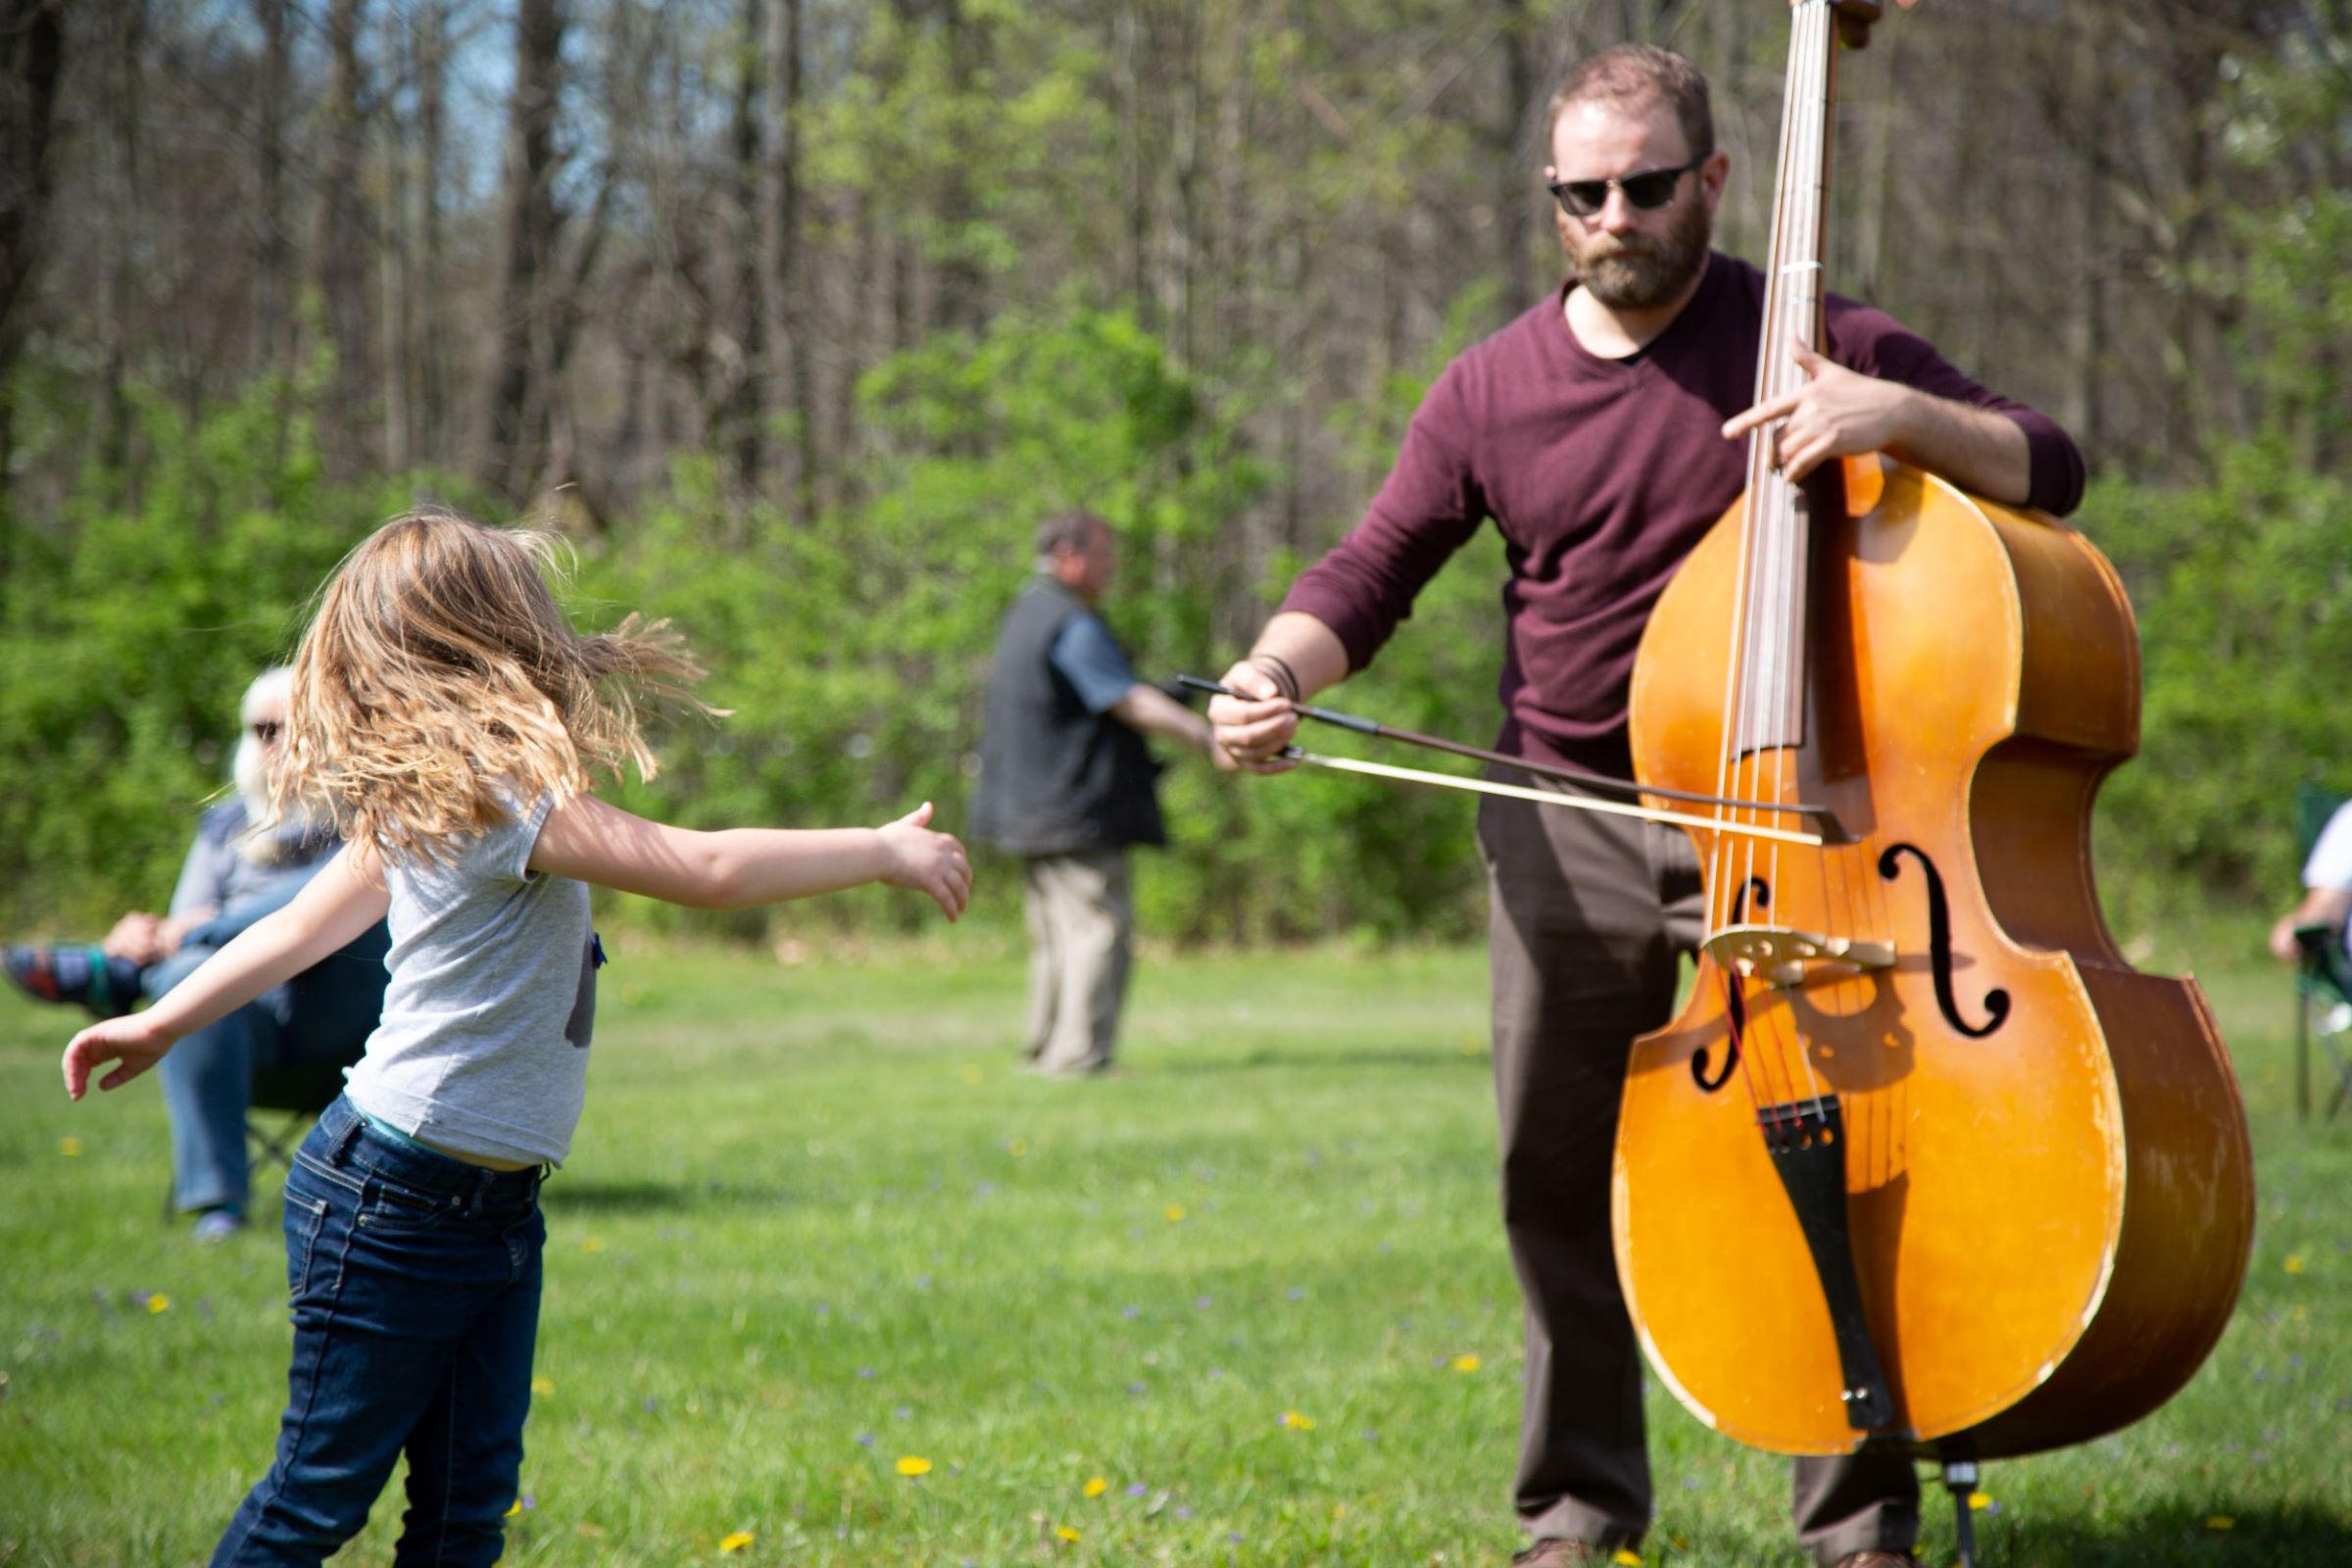 Man with cello outside with child dancing